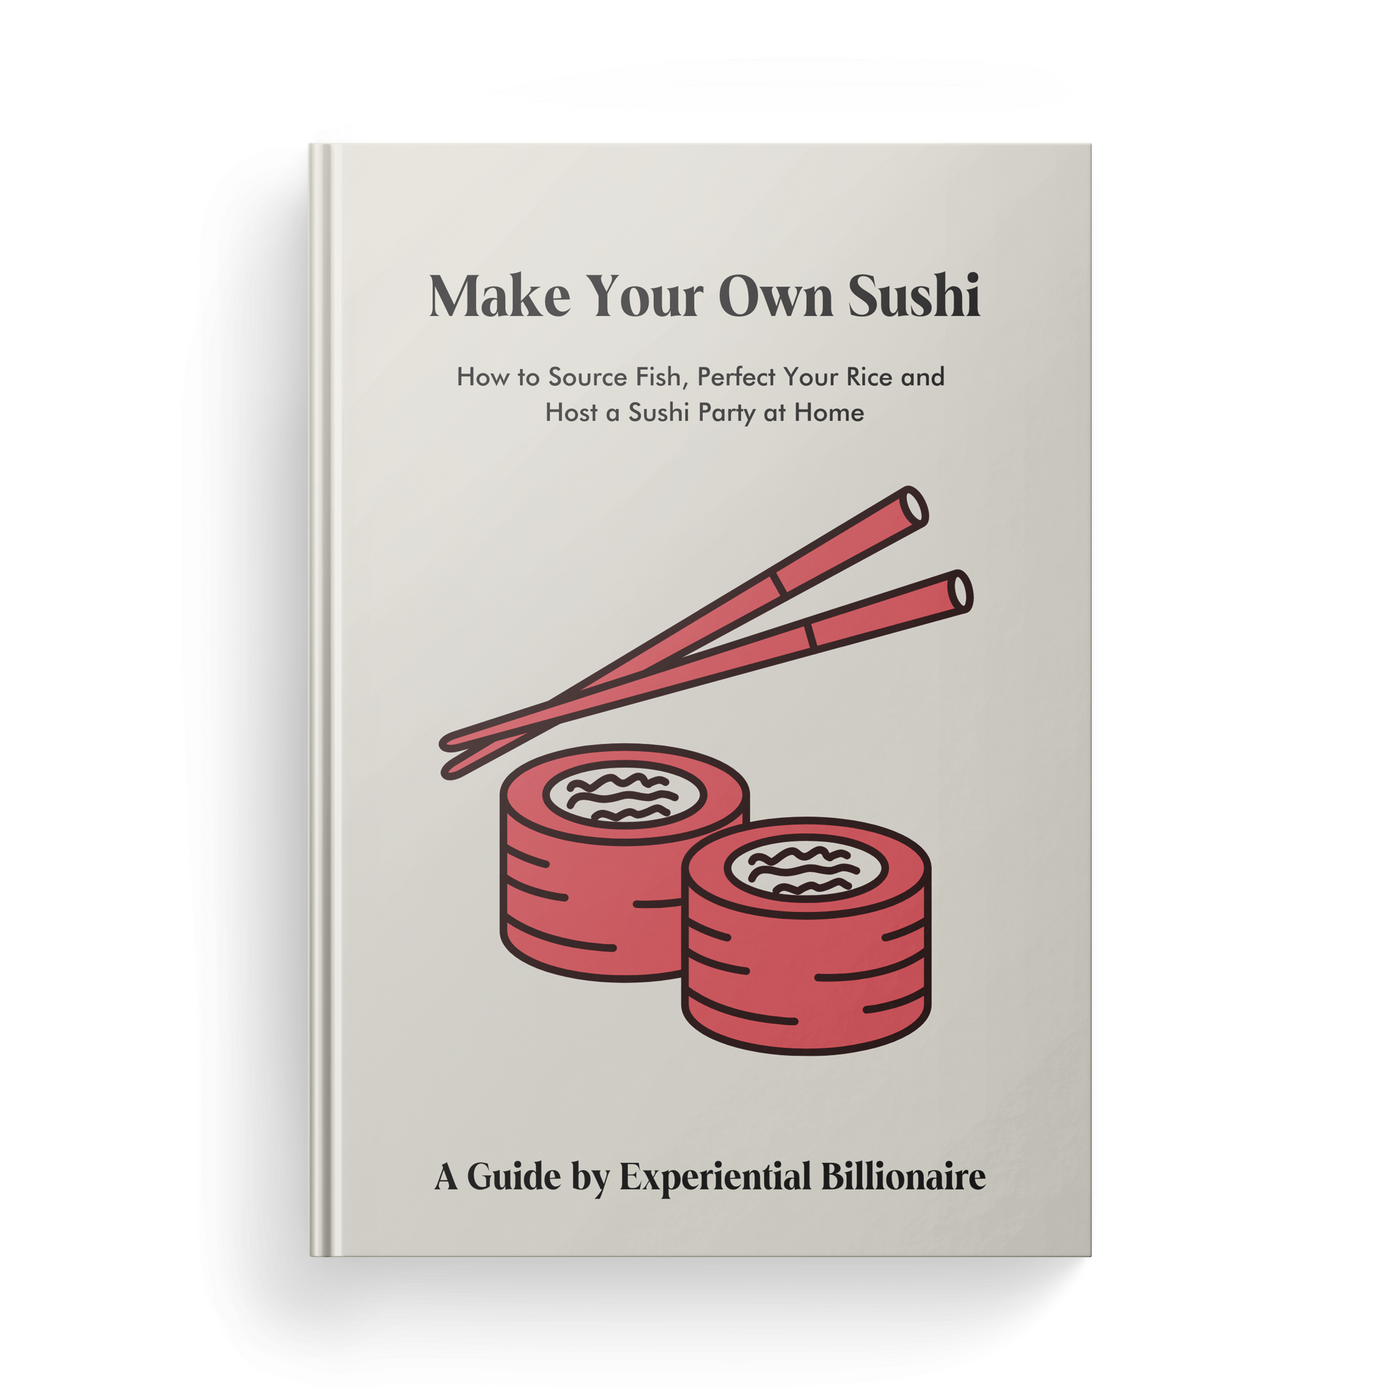 Experiential Billionaire's Guide to Making Sushi at Home